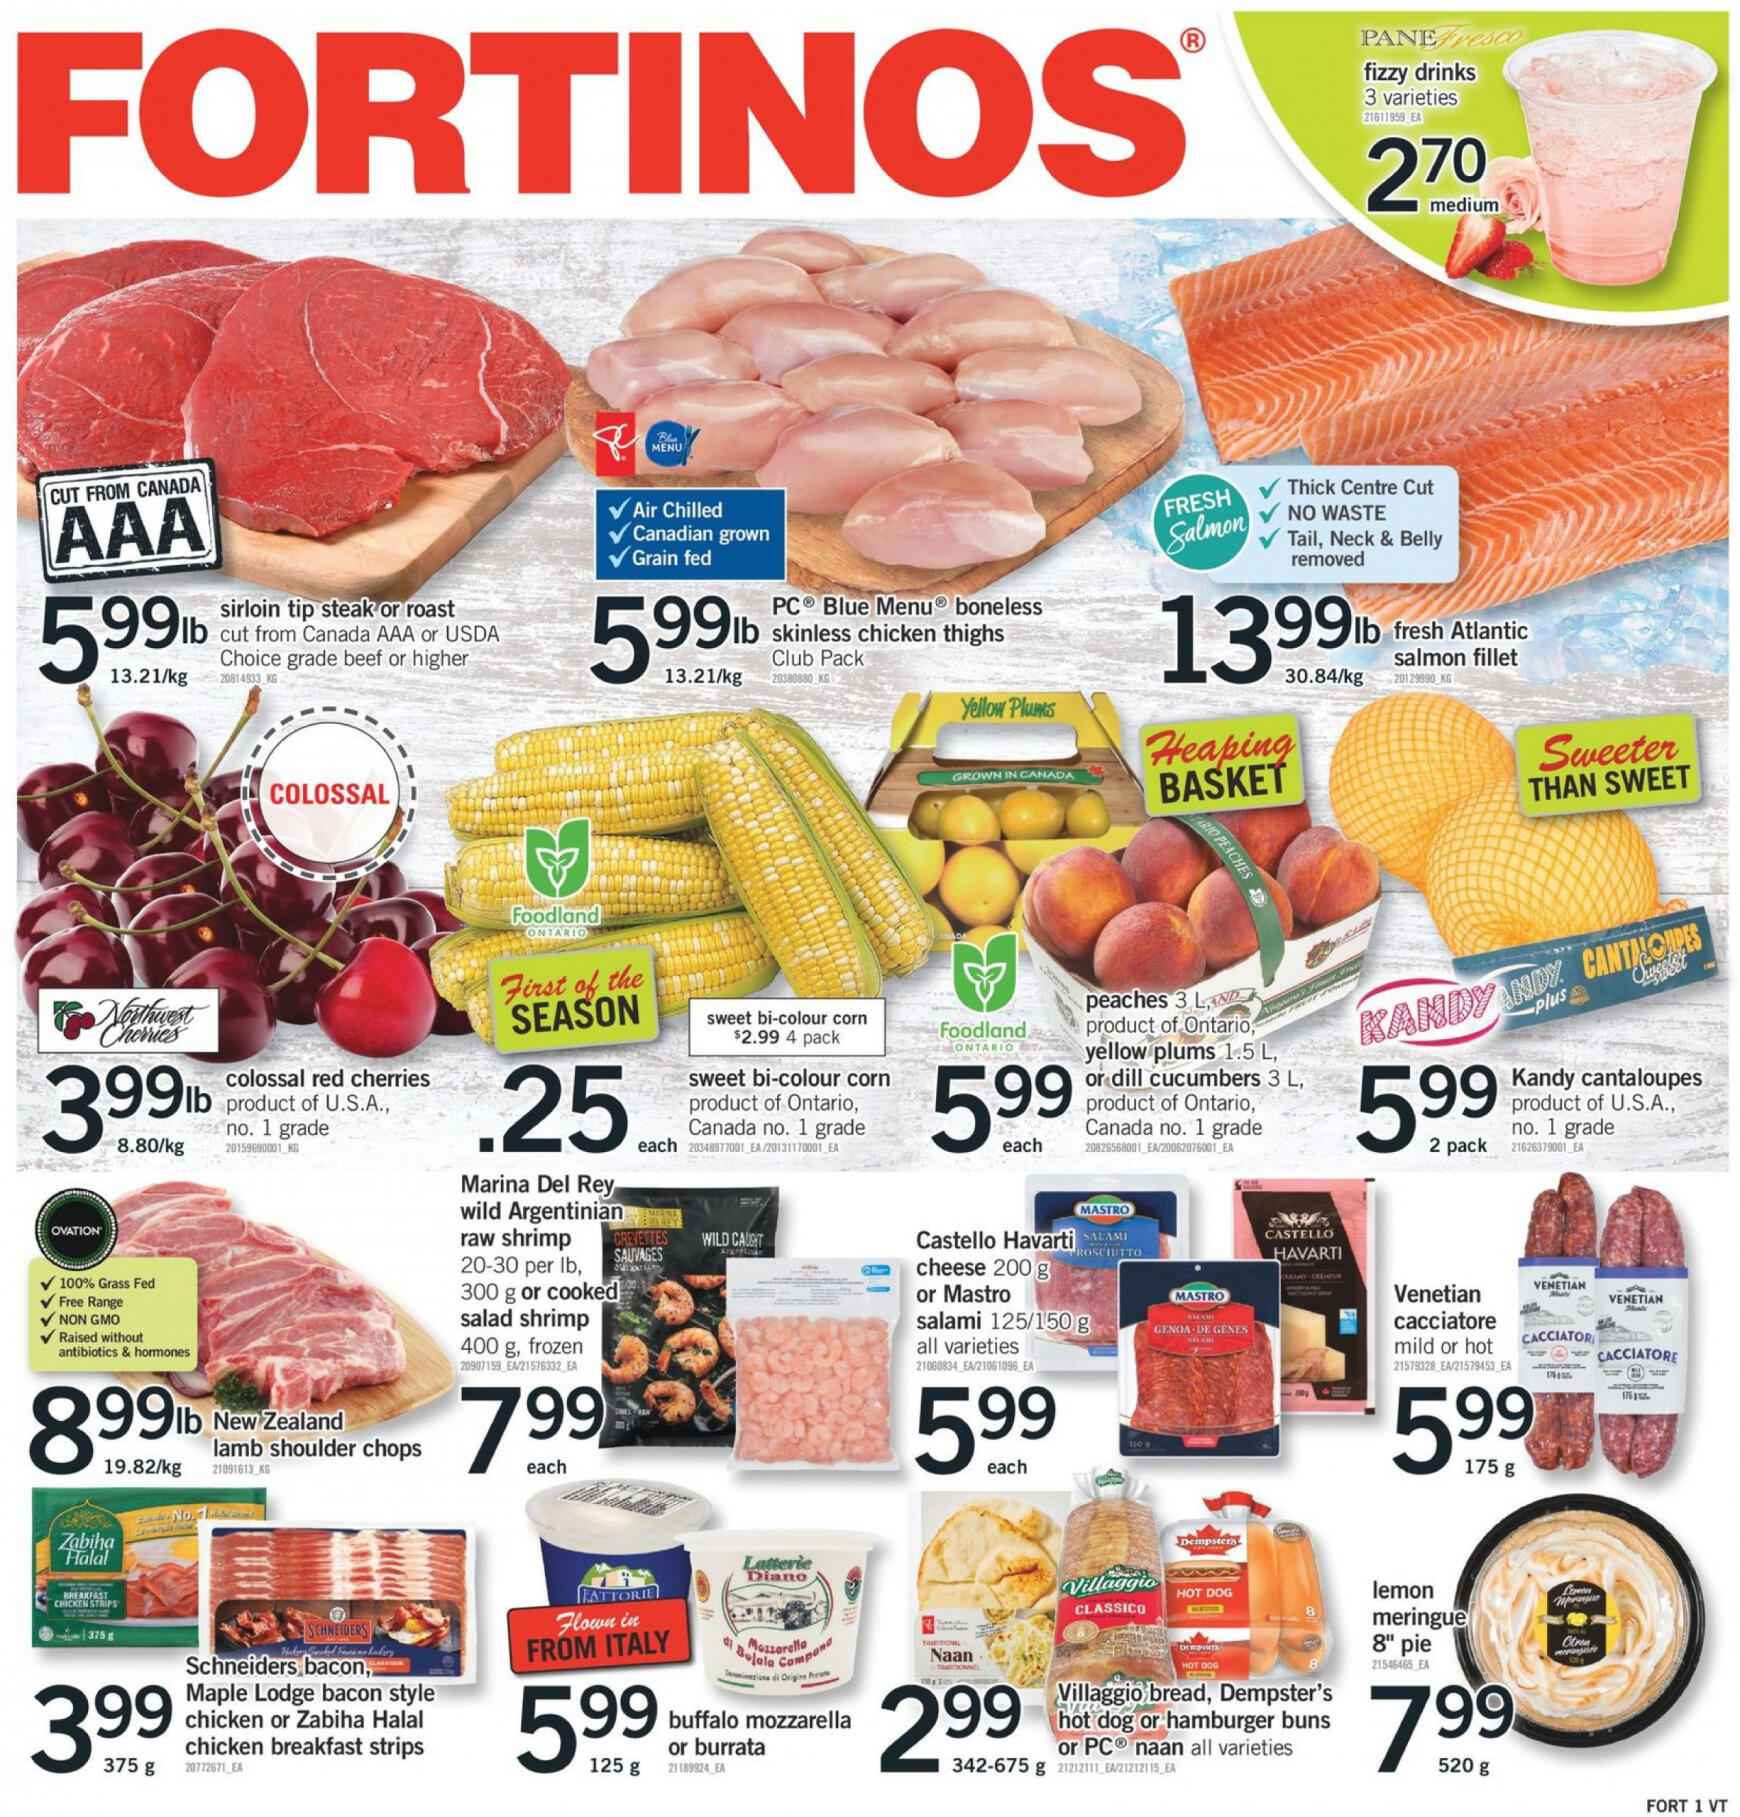 fortinos - Fortinos flyer current 18.07. - 24.07.